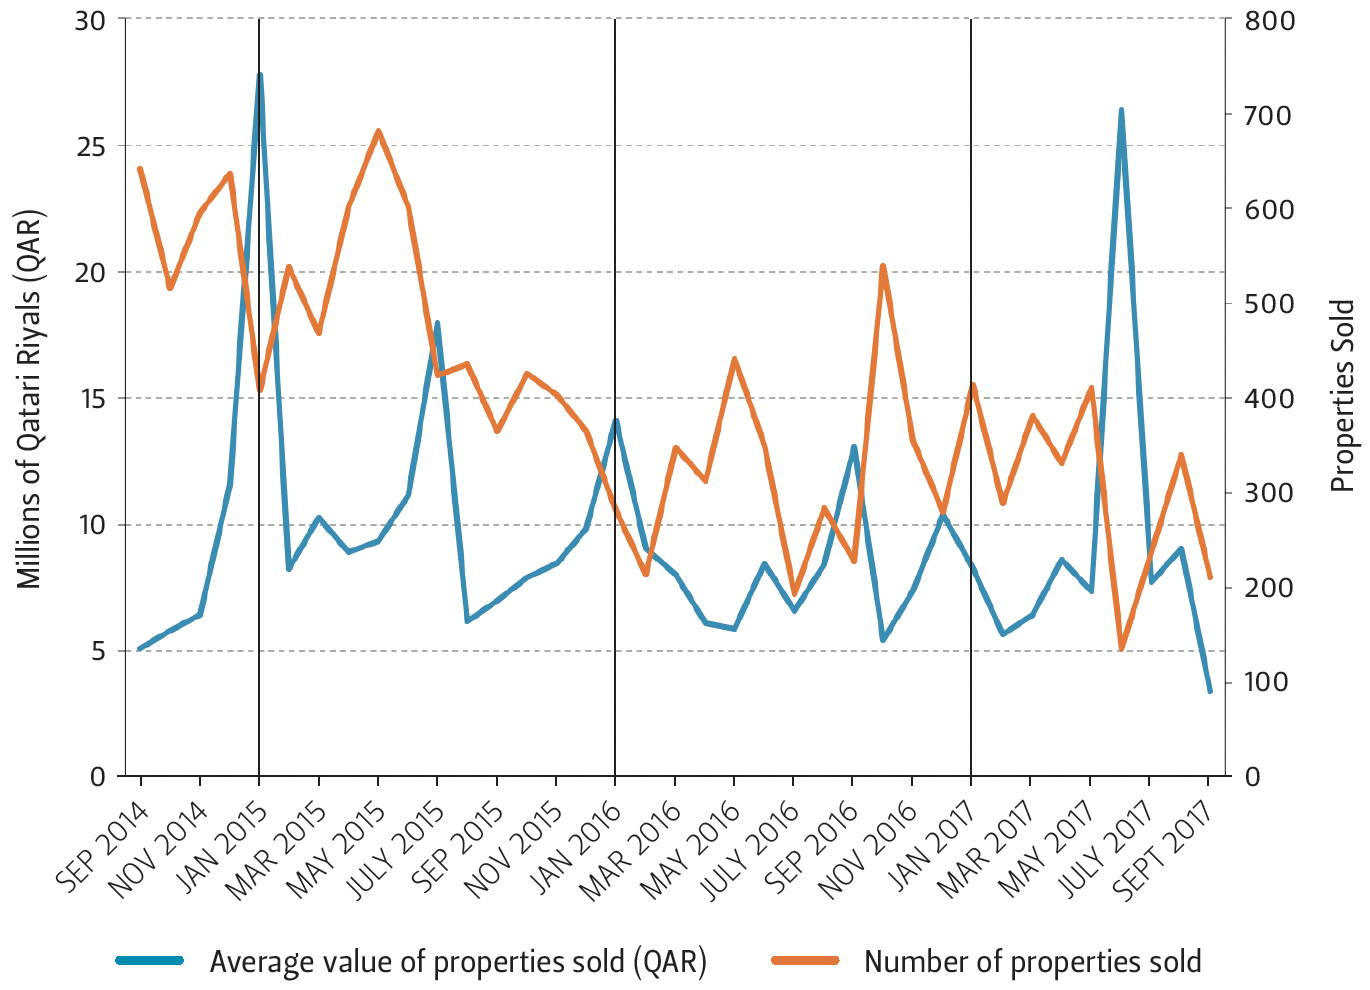 This graph compares the average value of properties sold and the number of properties sold in Qatar over time.